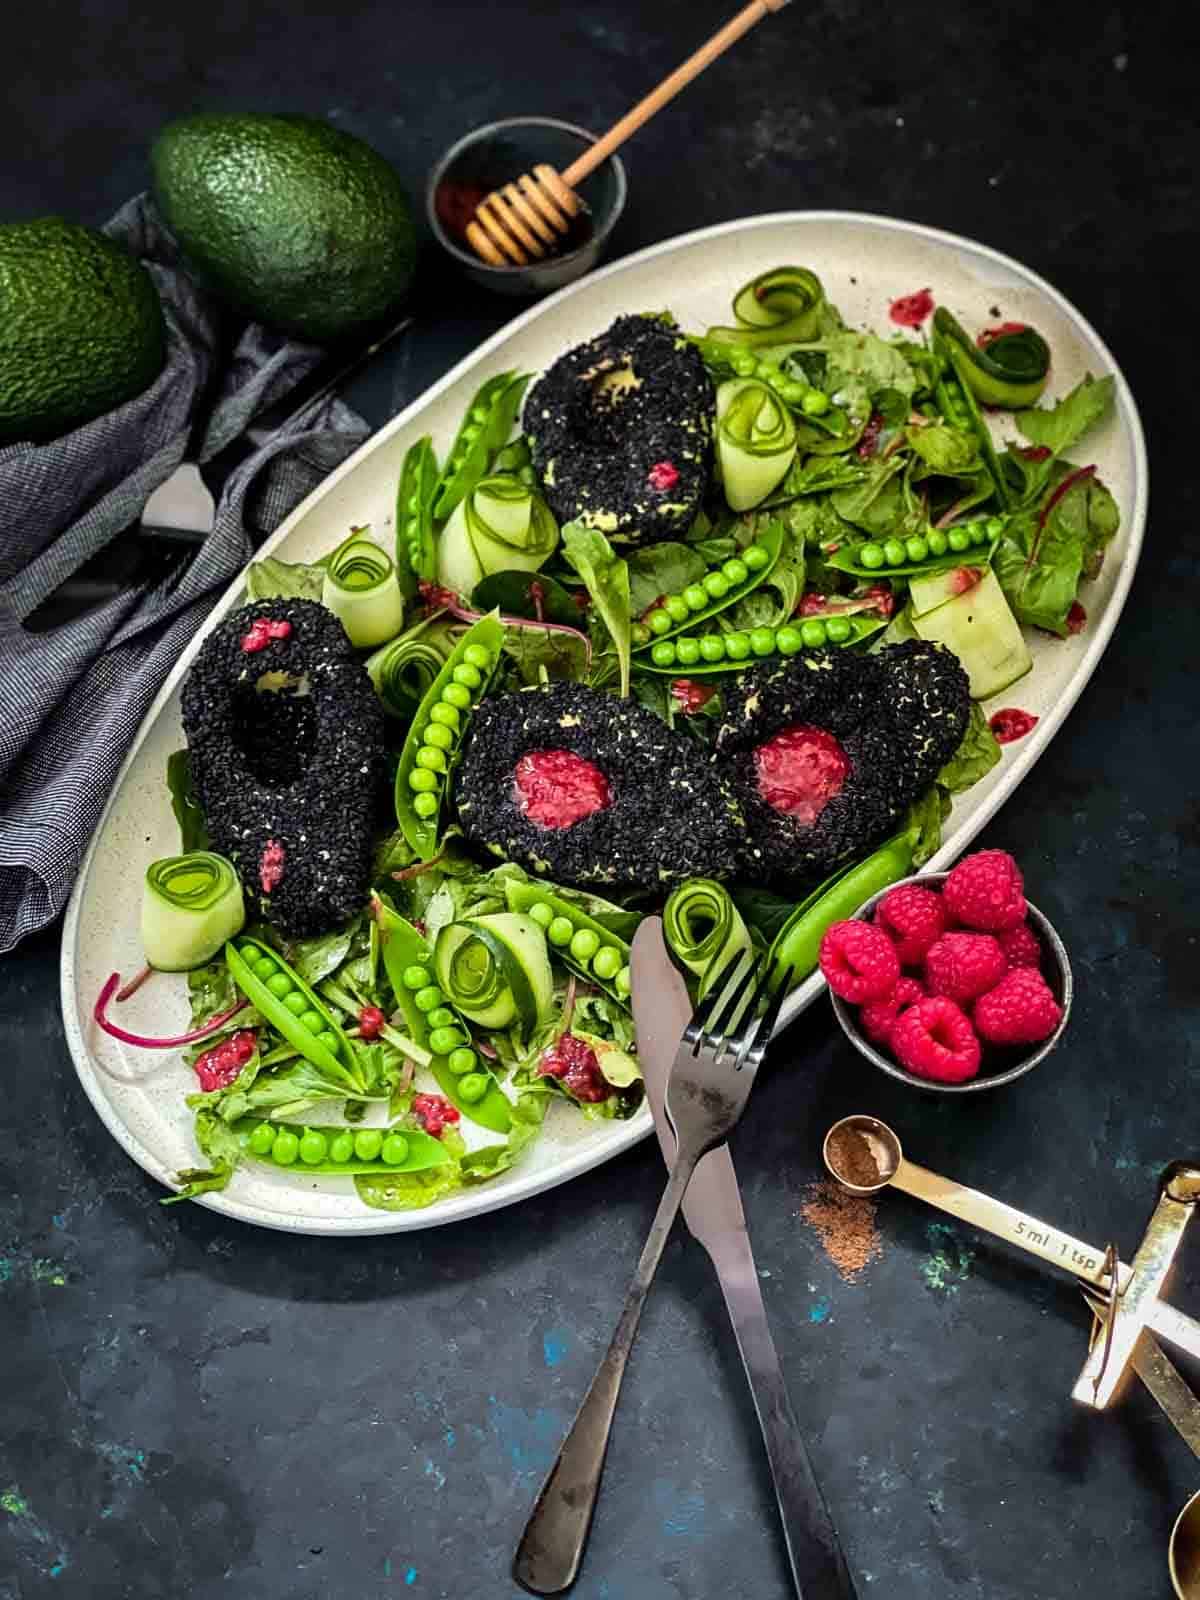 Sesame Avocado Cucumber Salad in a oval salad platter with black cutlery, bowl of fresh strawberries and 2 whole avocados on the side